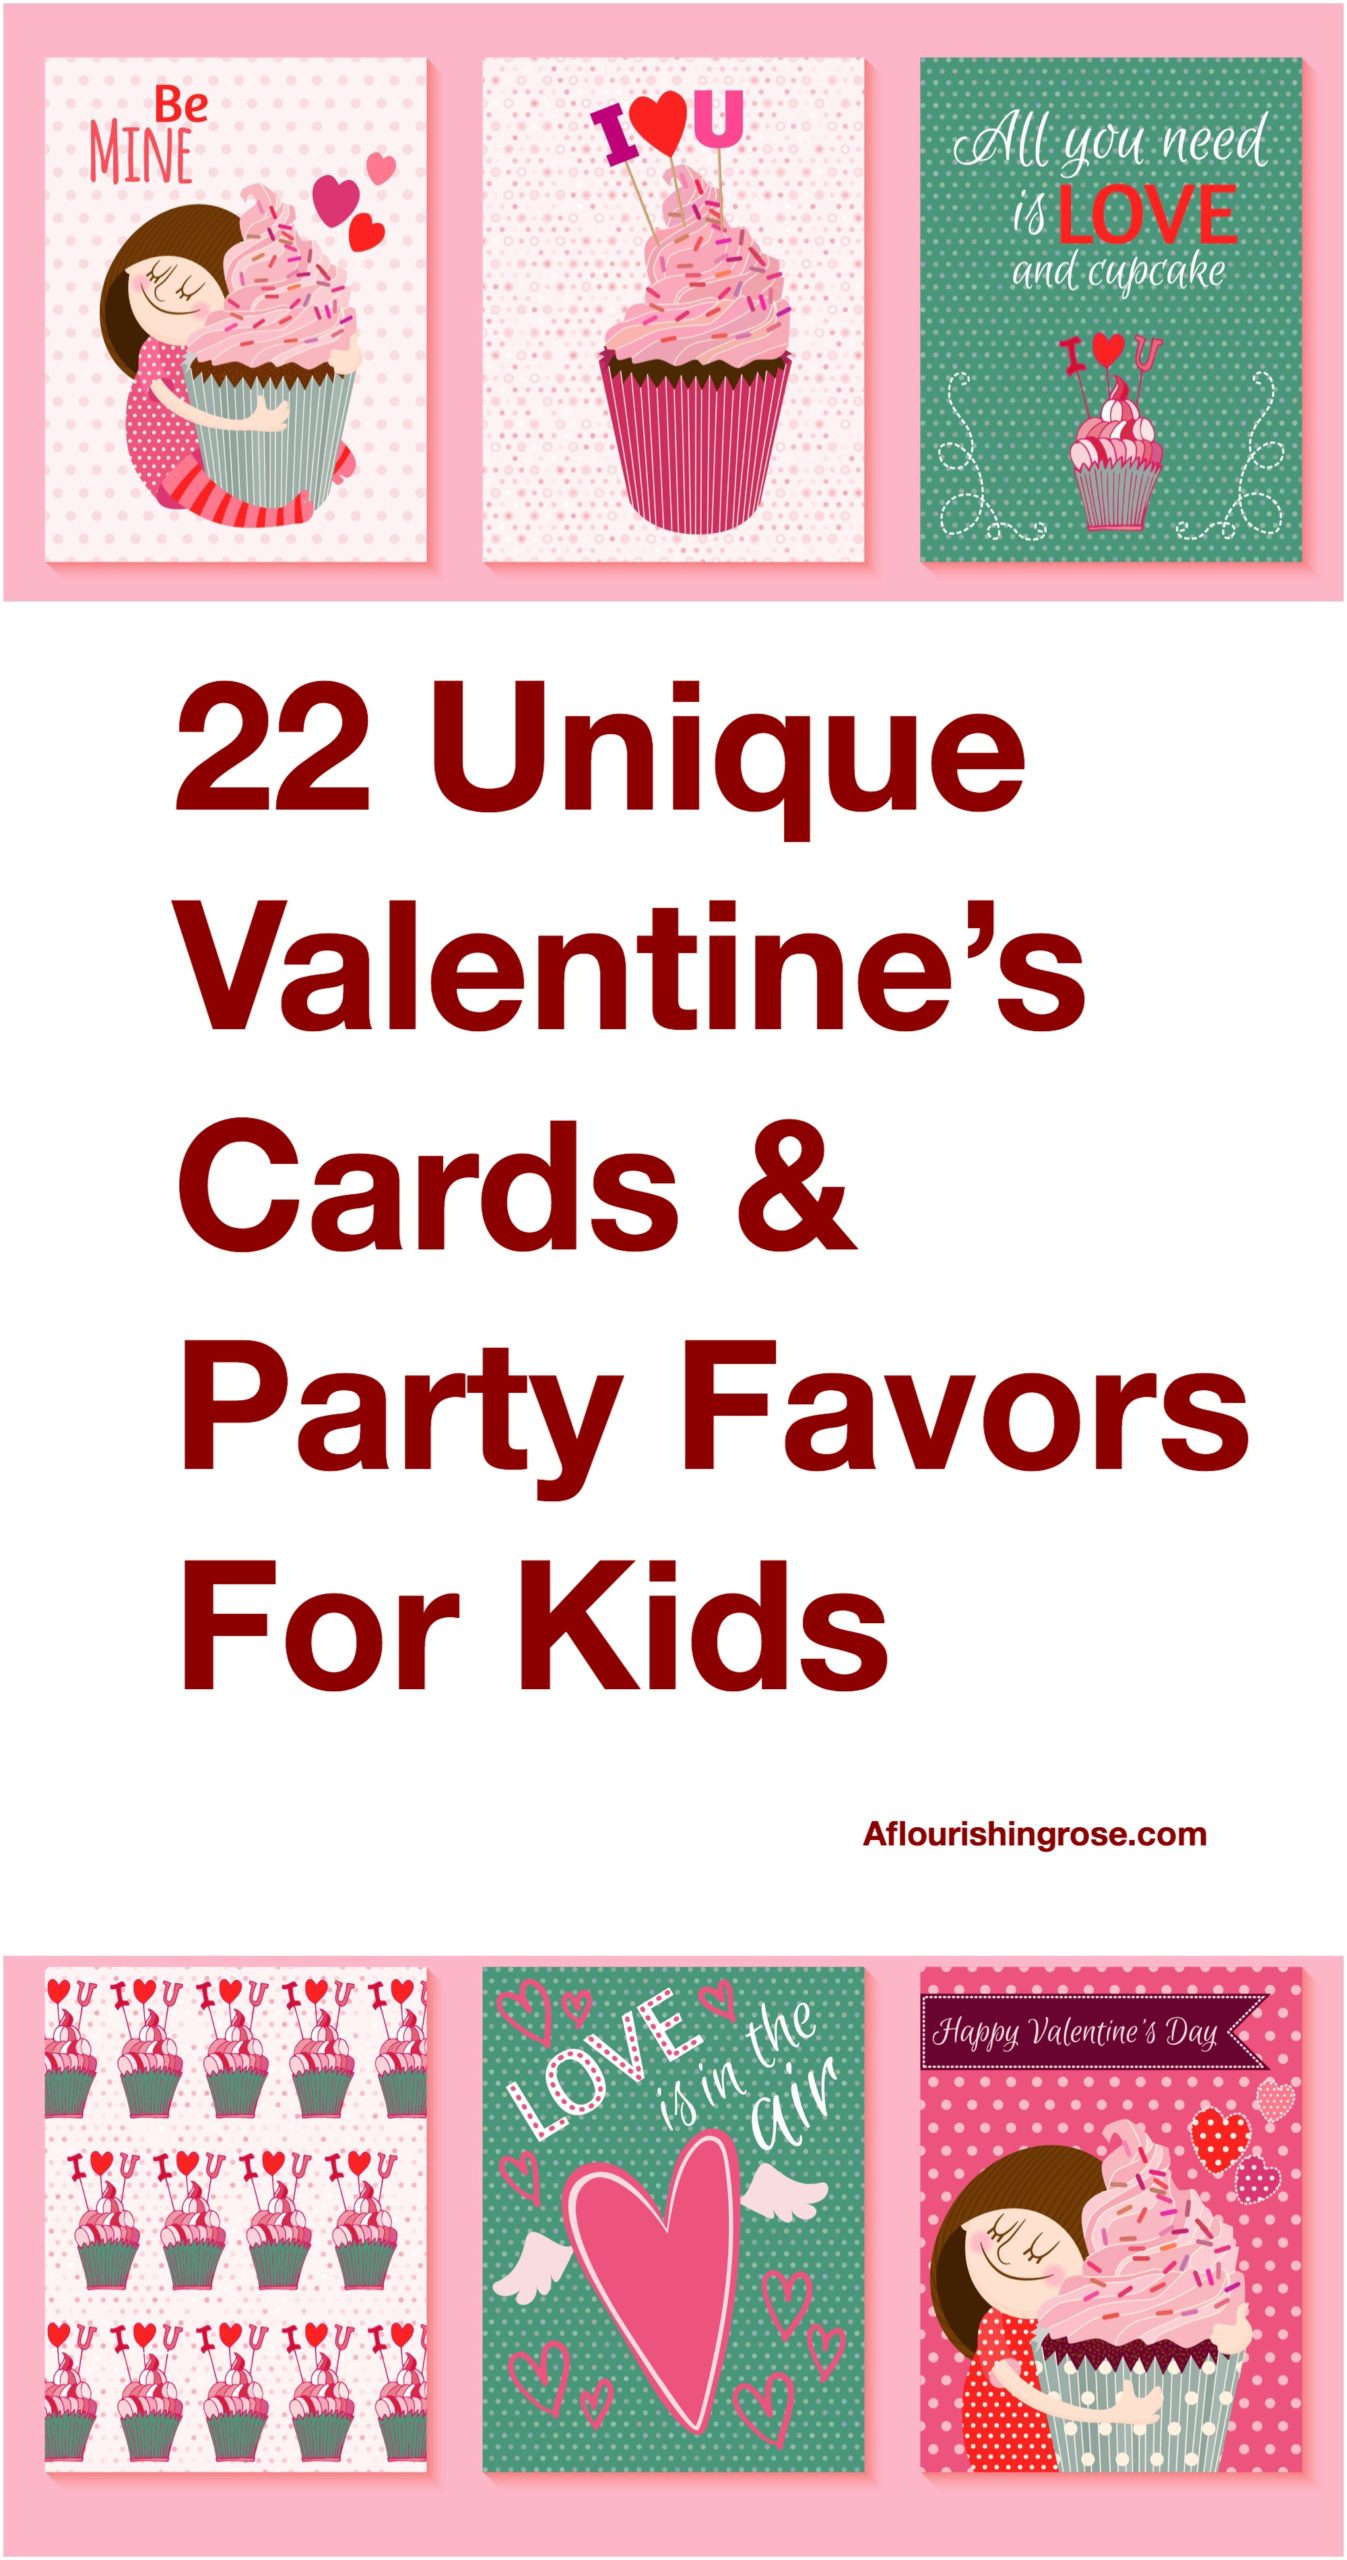 22 Unique Valentine’s Cards and Party Favors for Kids